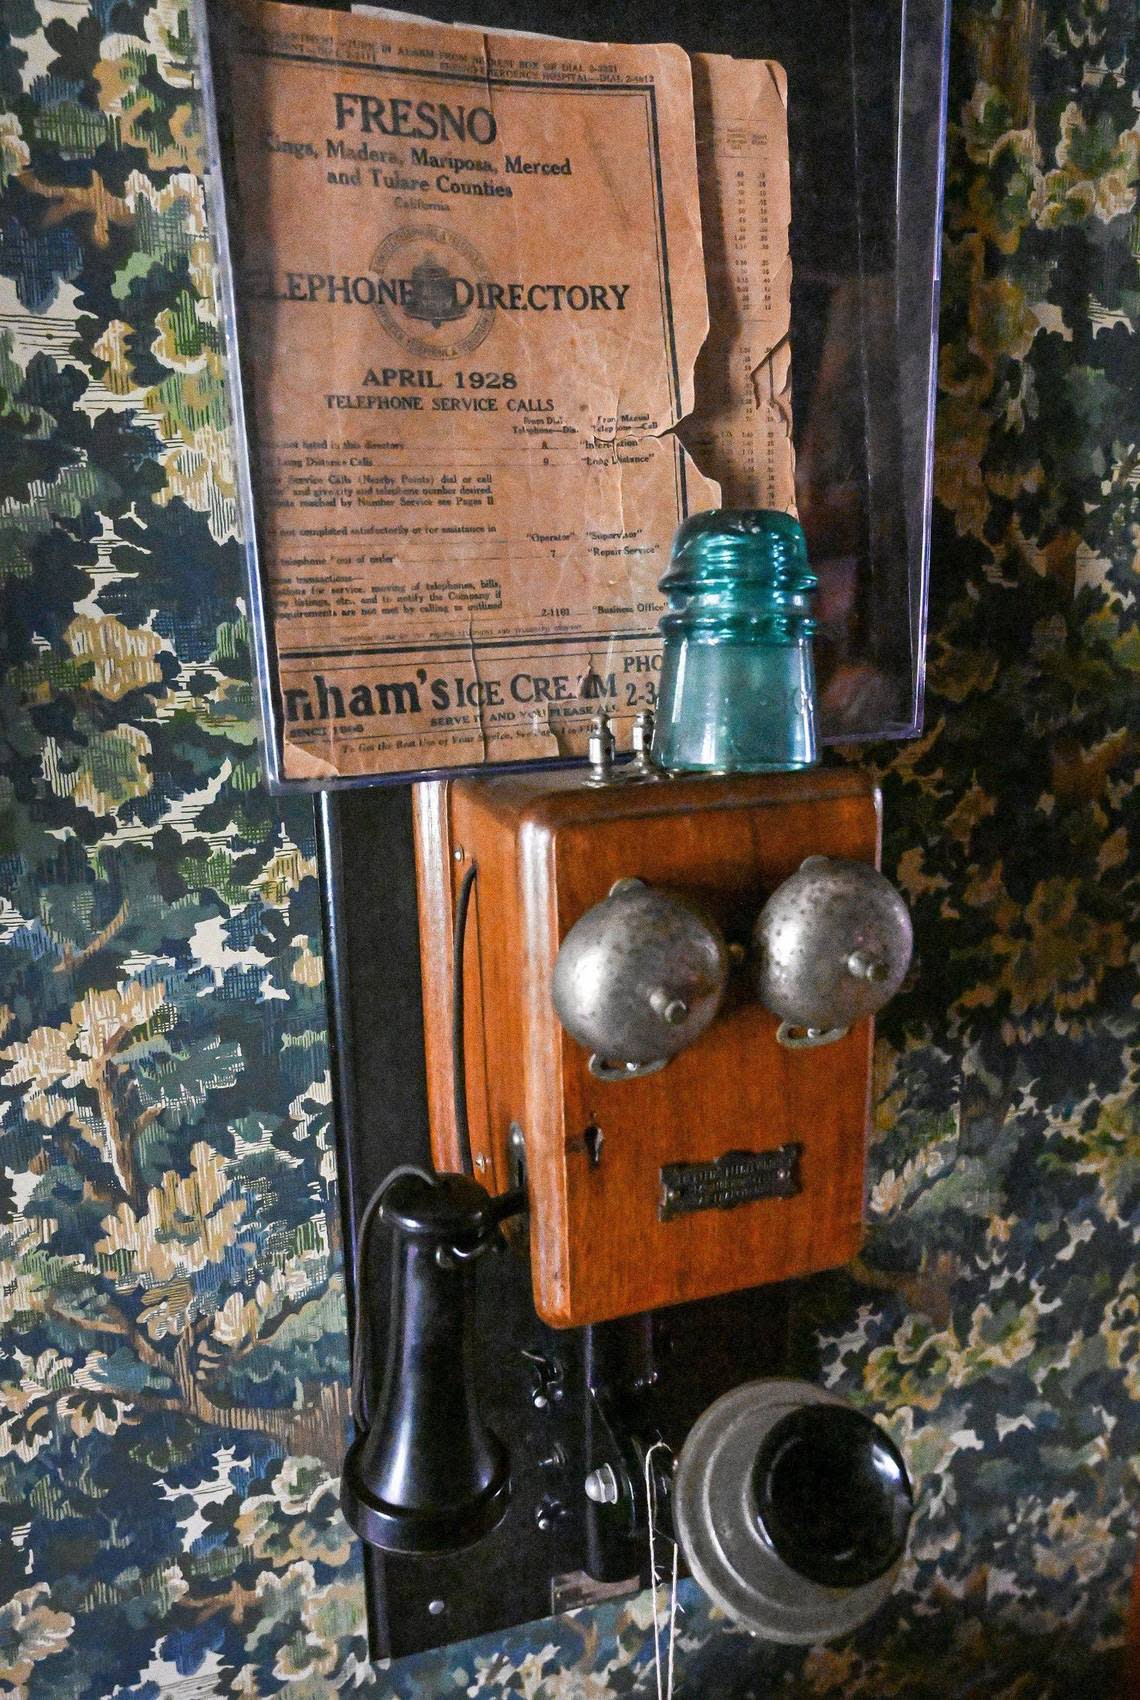 An old telephone hangs on the wall of the Meux home along with 1928 Fresno telephone directory that includes Dr. Thomas Meux’s phone number. CRAIG KOHLRUSS/ckohlruss@fresnobee.com